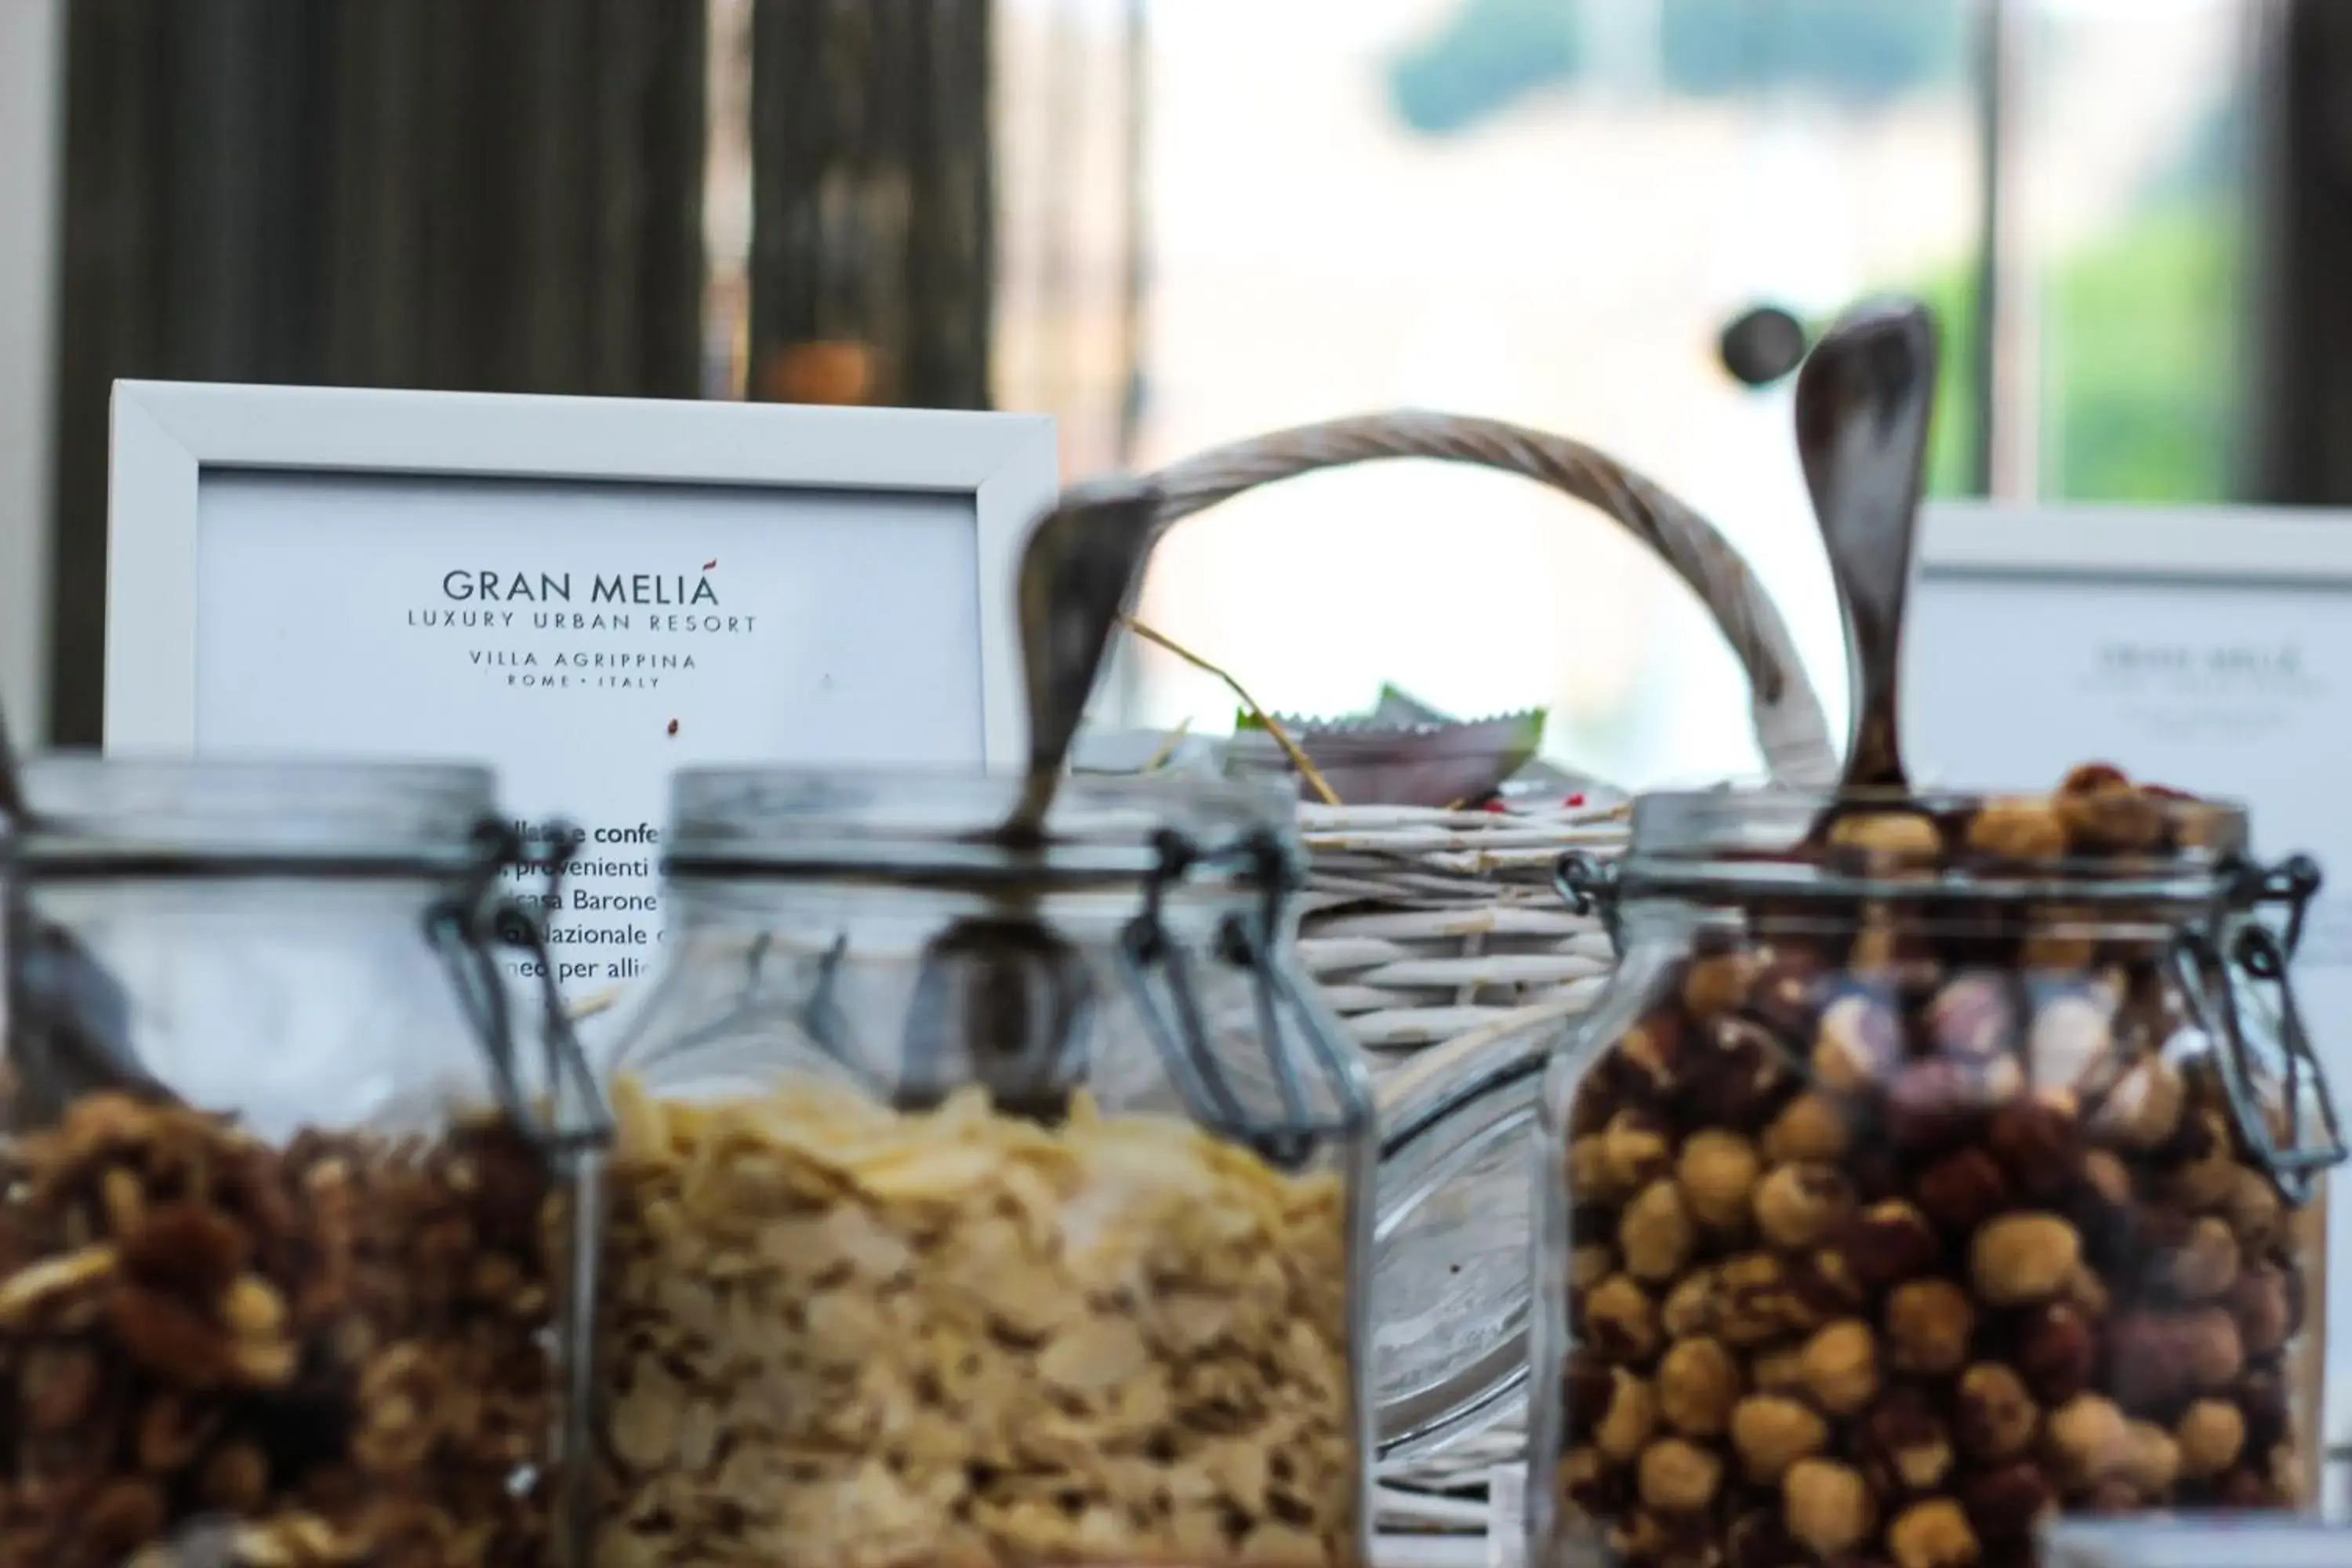 Buffet breakfast in Villa Agrippina Gran Meliá - The Leading Hotels of the World